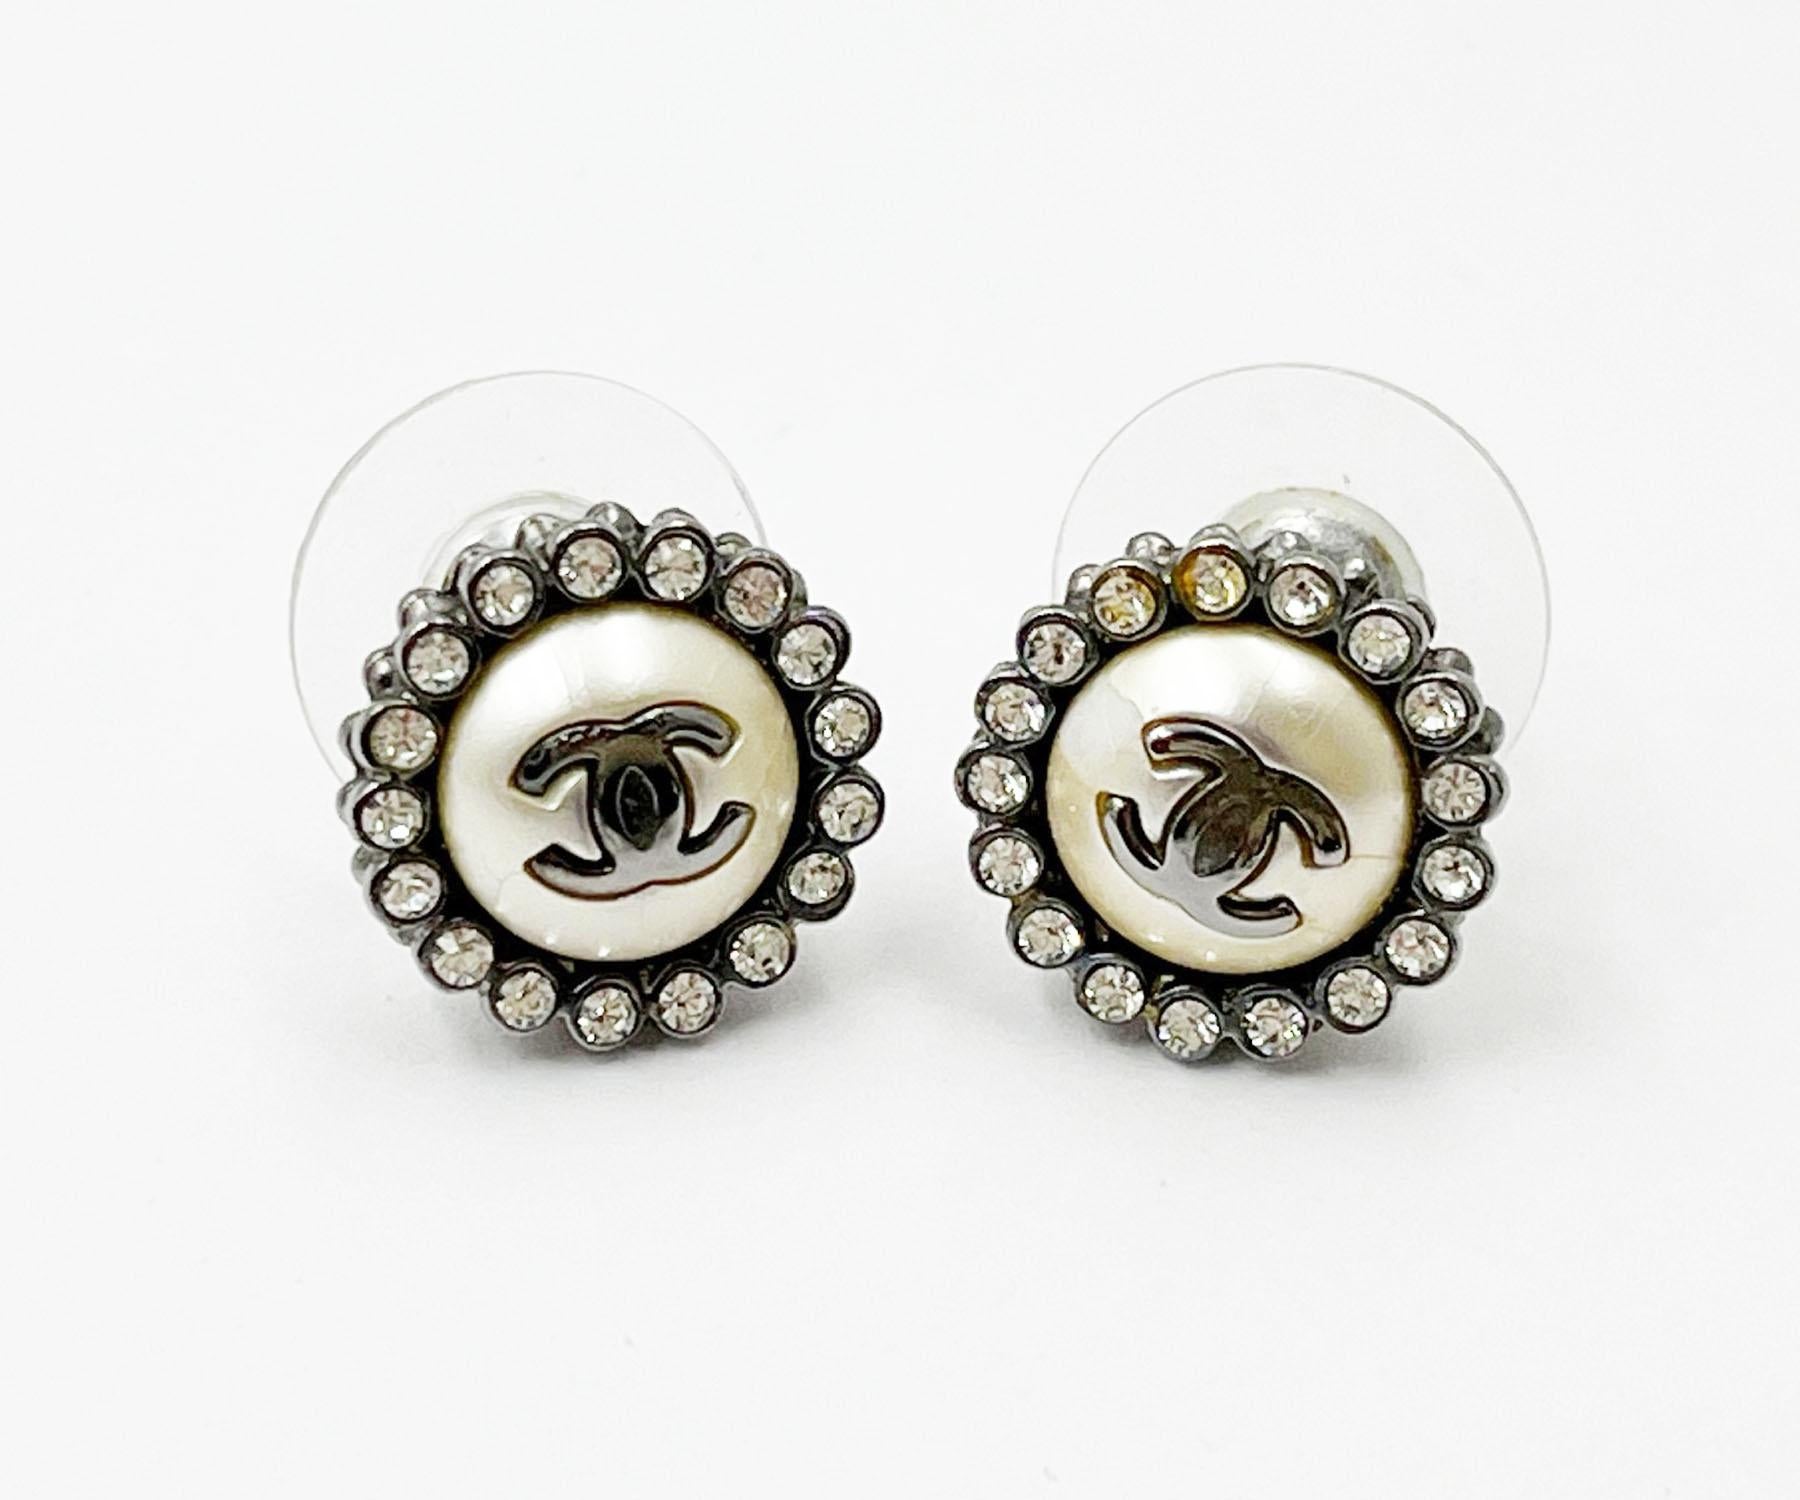 Chanel Gunmetal CC Round Crystal Small Piercing Earrings

*Marked 16
*Made in France

-It's approximately 0.5